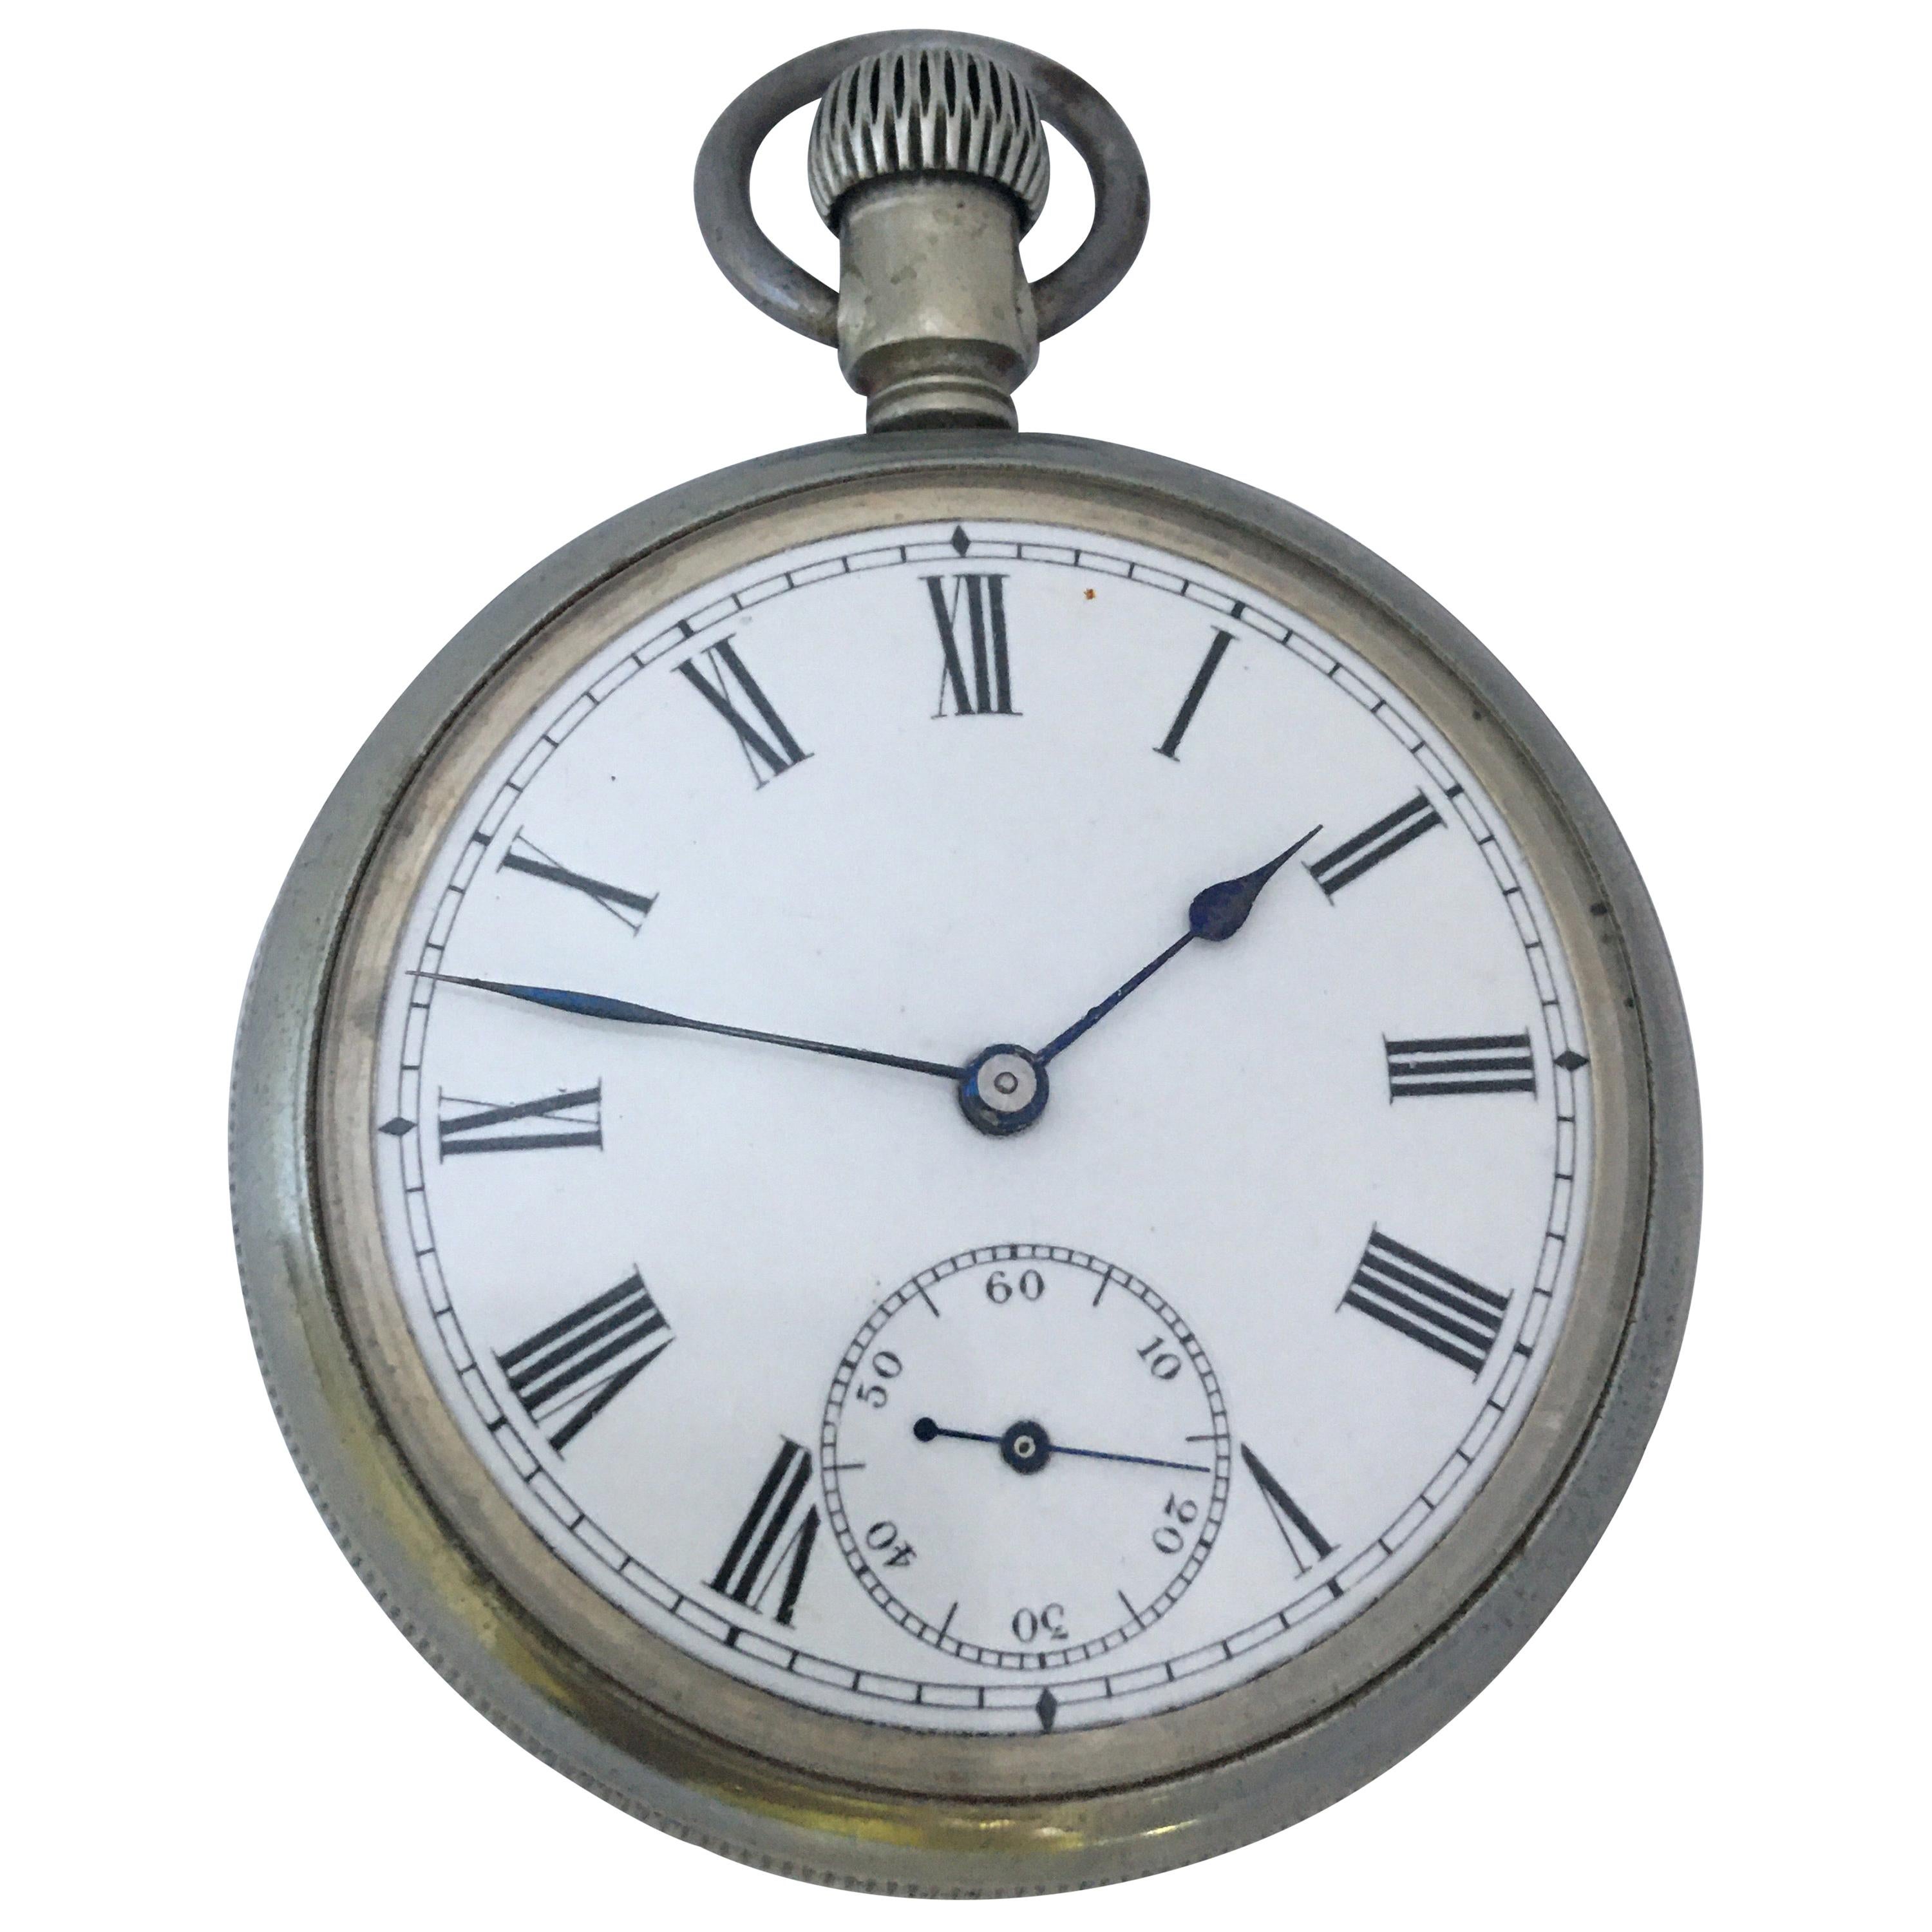 Antique Waterbury & Watch Co. Hand-Winding Pocket Watch For Sale